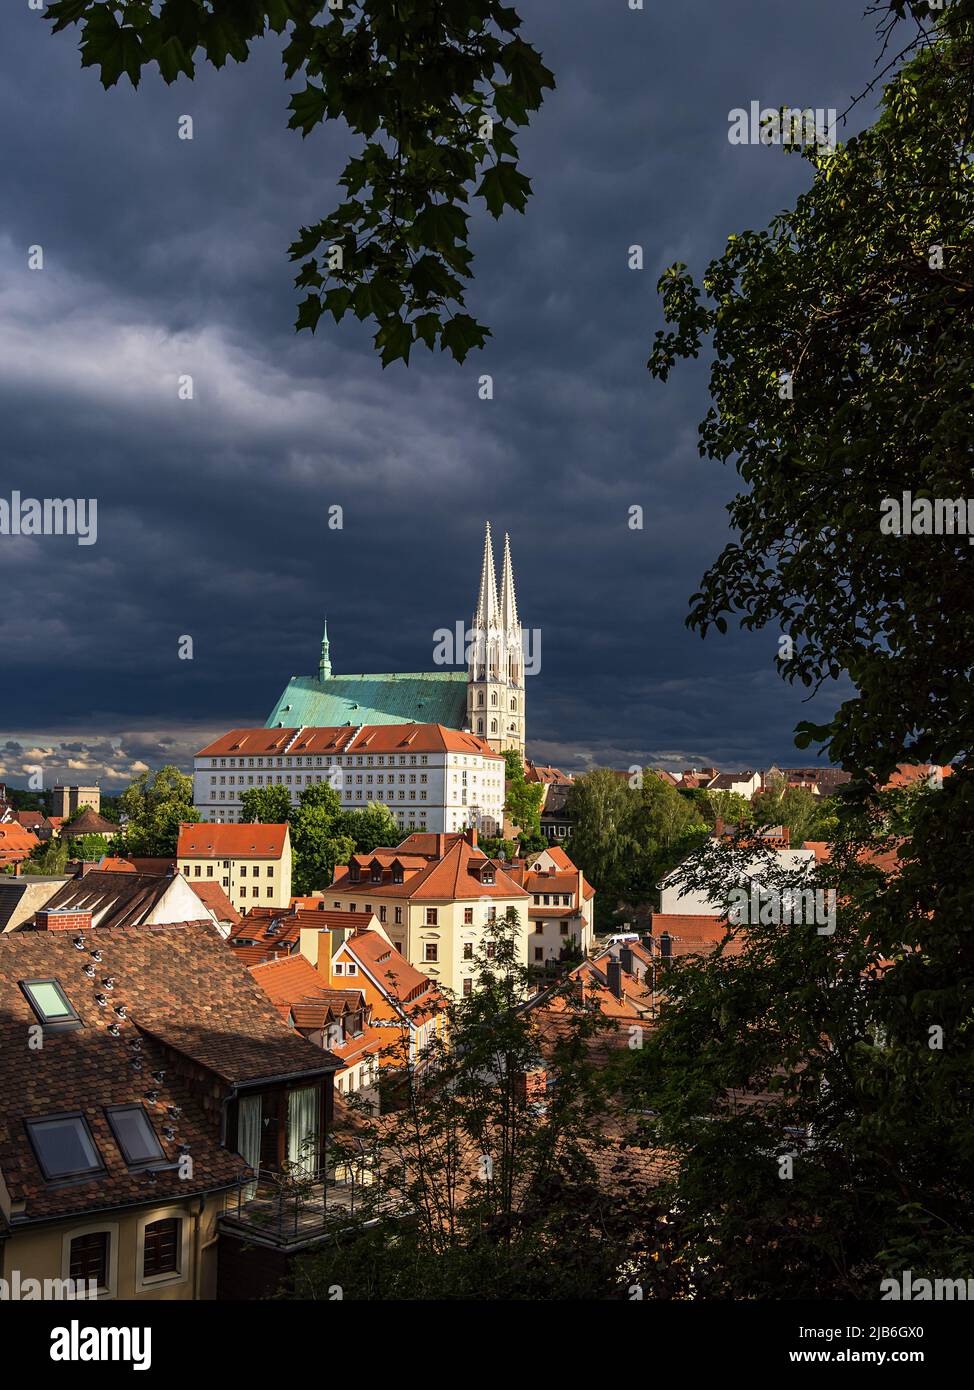 View to the church Peterskirche in Goerlitz, Germany. Stock Photo